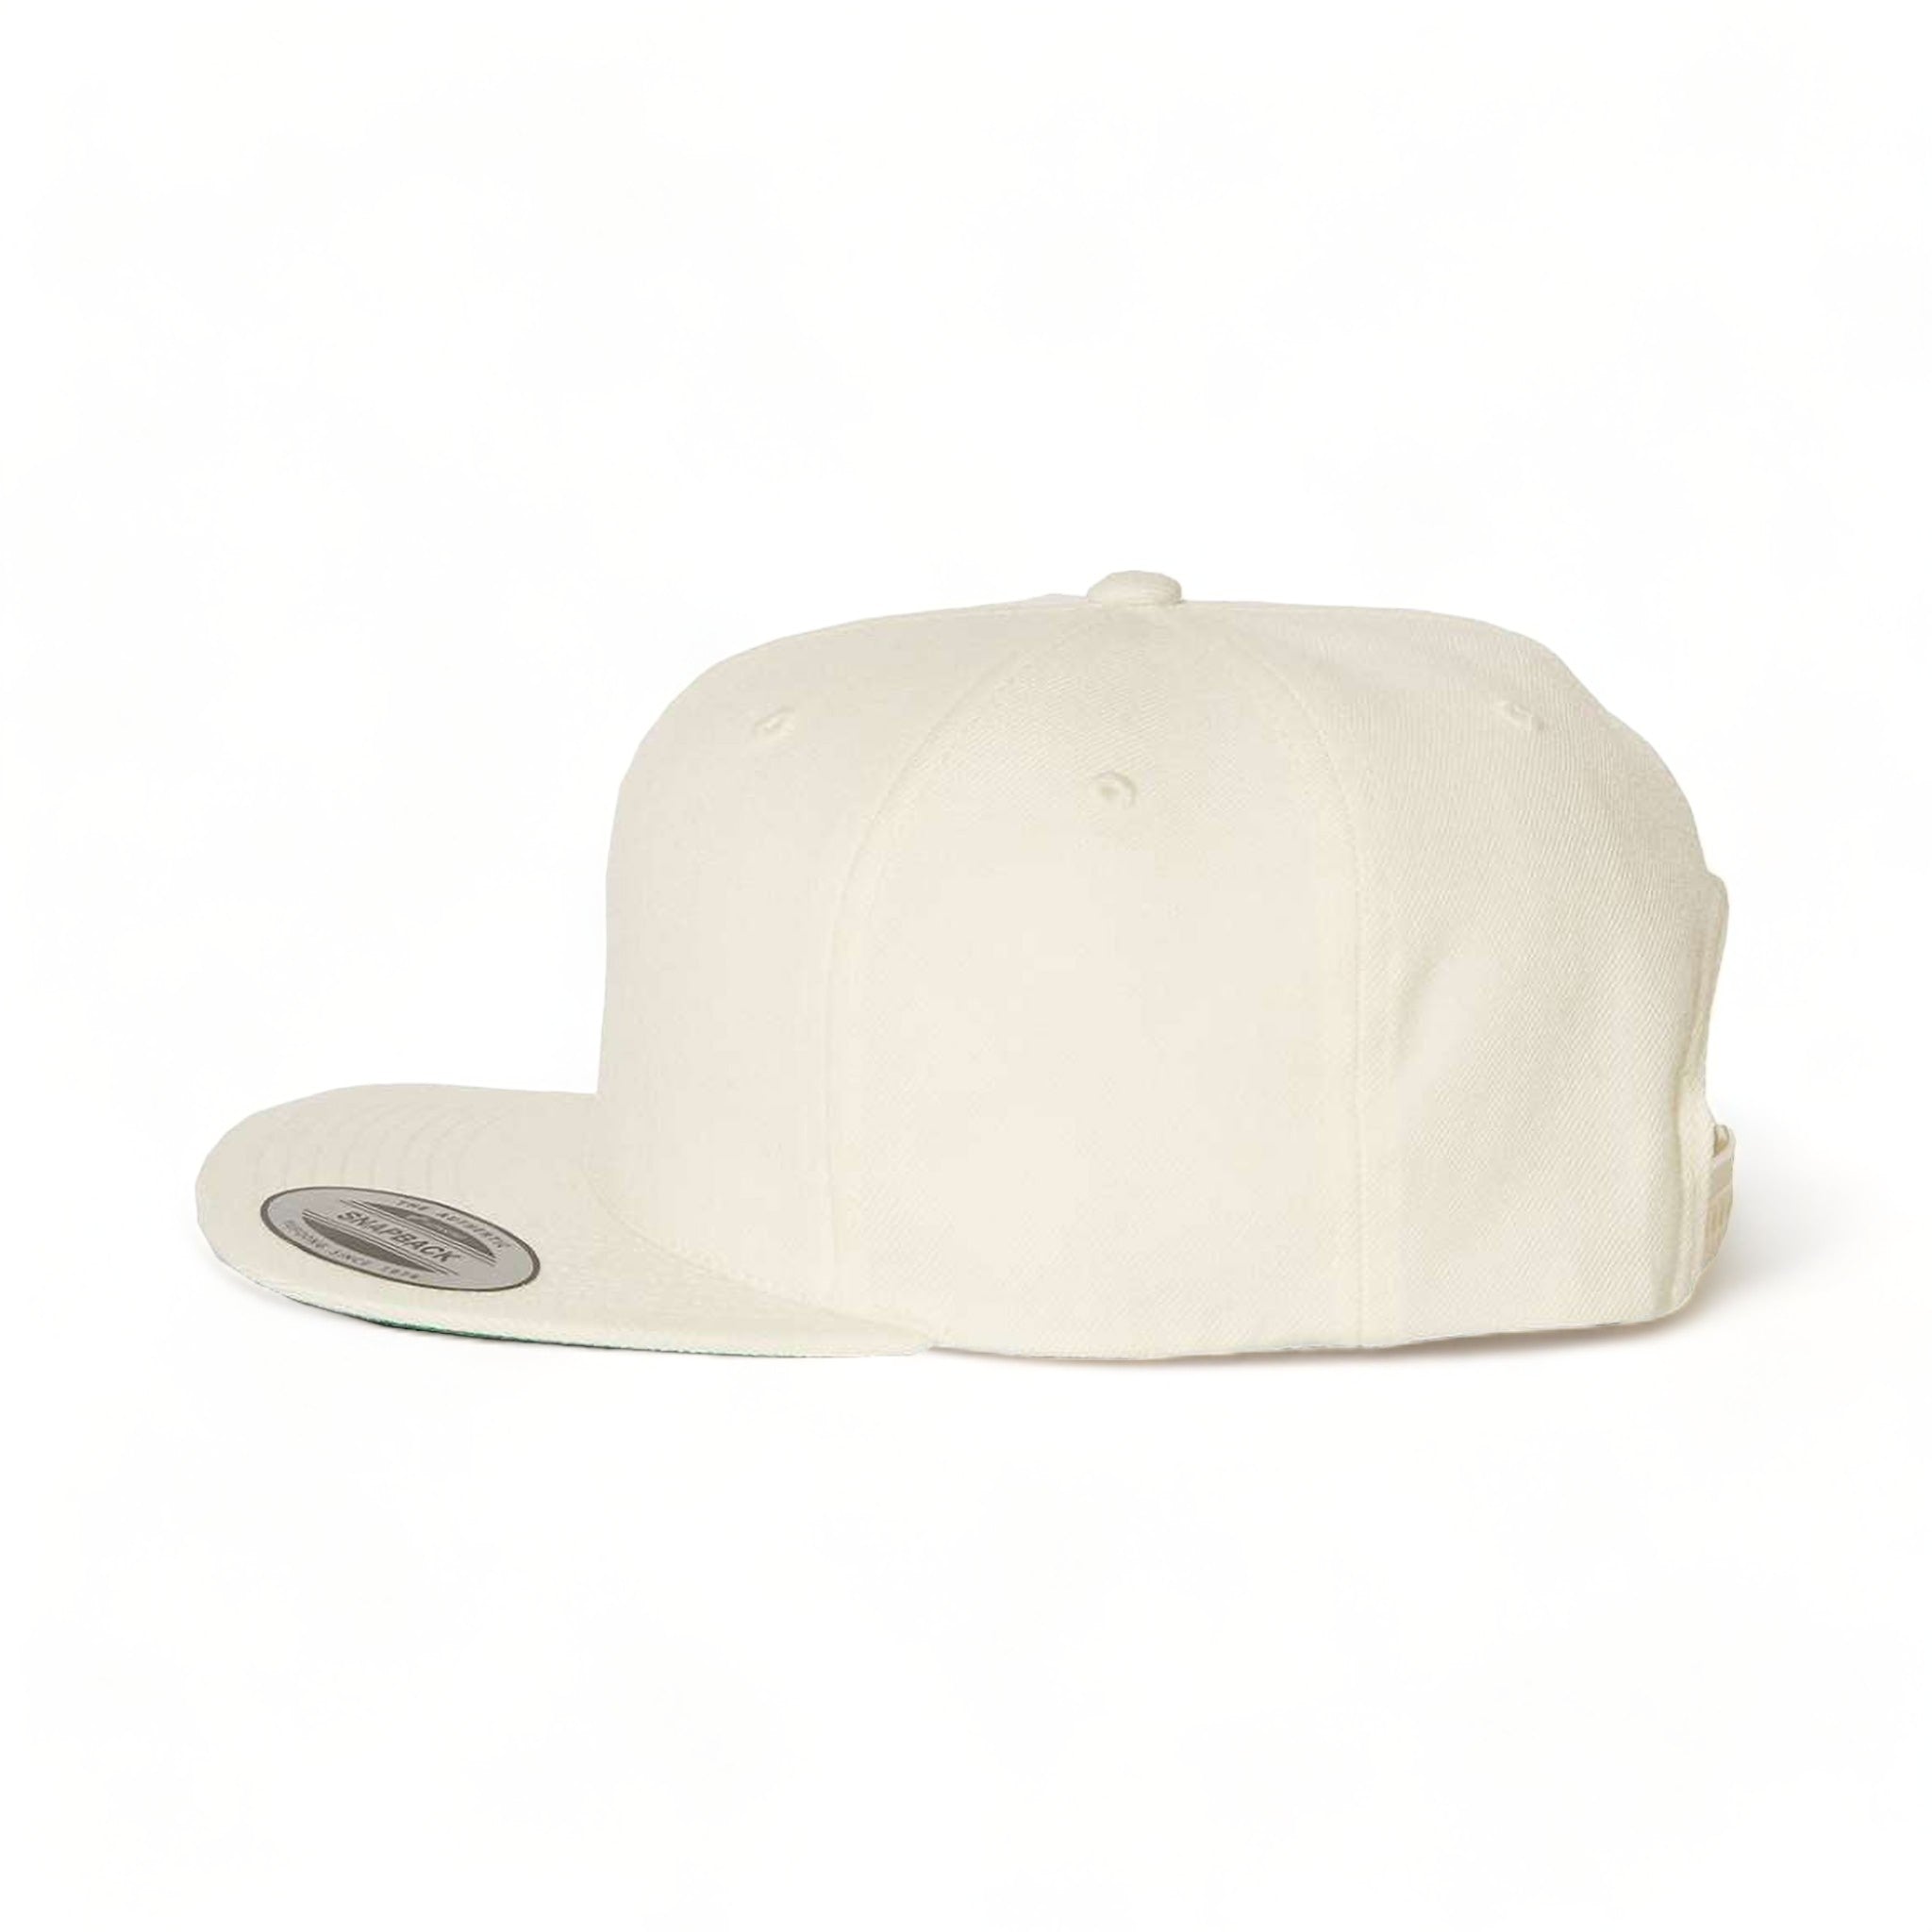 Side view of YP Classics 6089M custom hat in natural